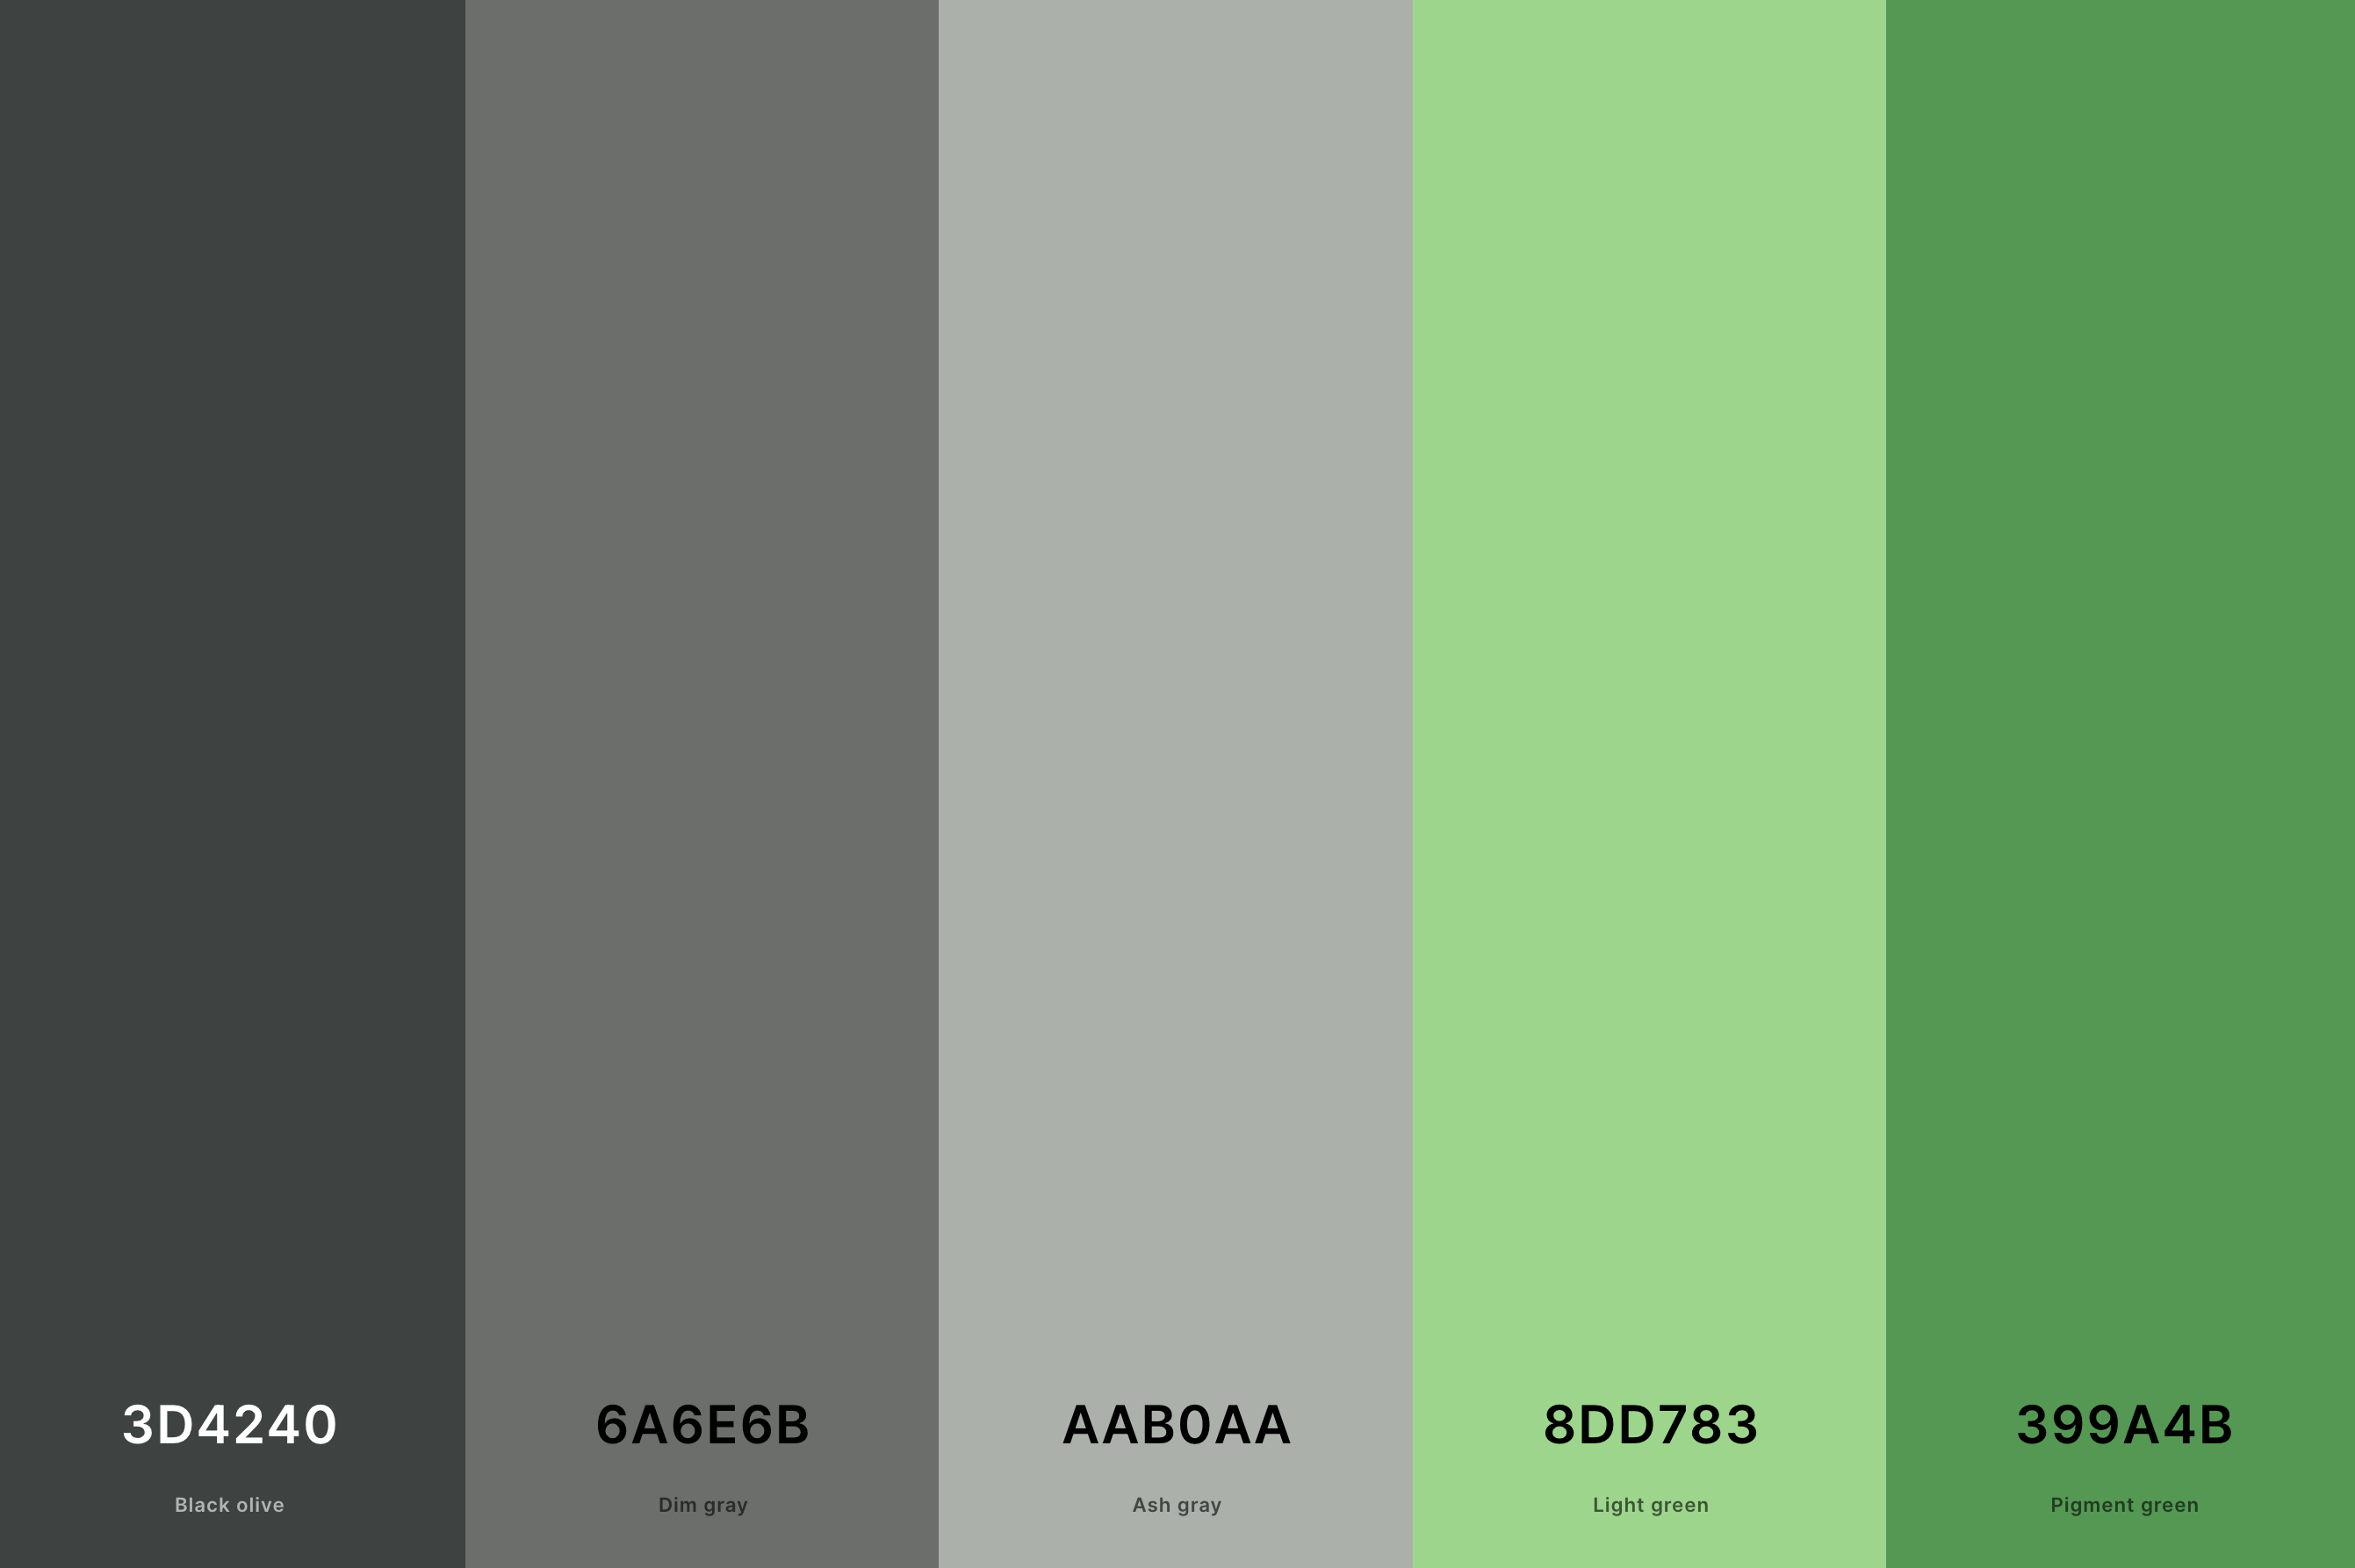 4. Green And Gray Color Palette Color Palette with Black Olive (Hex #3D4240) + Dim Gray (Hex #6A6E6B) + Ash Gray (Hex #AAB0AA) + Light Green (Hex #8DD783) + Pigment Green (Hex #399A4B) Color Palette with Hex Codes